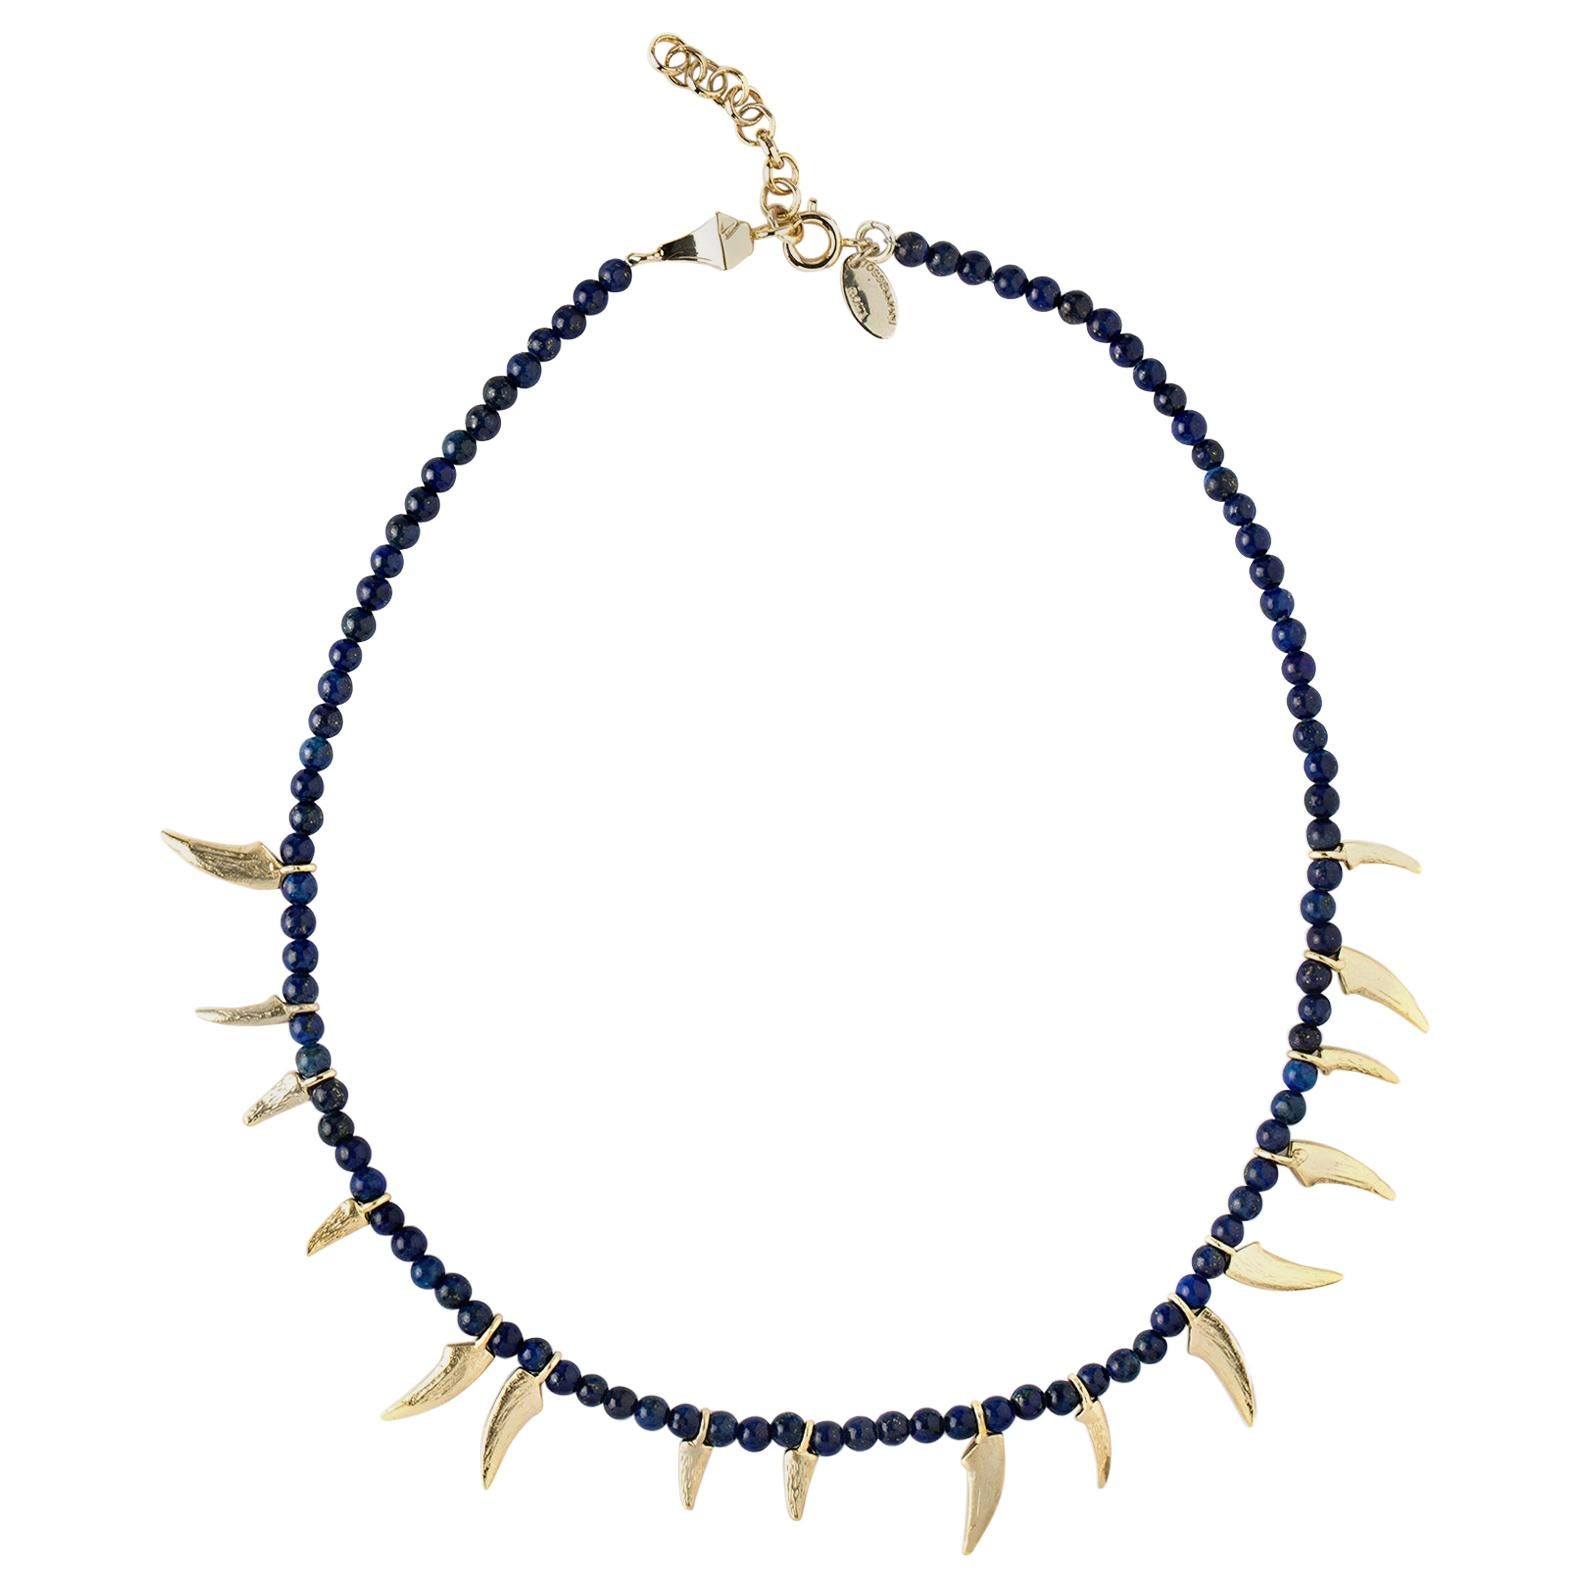 Lapis Lazuli Beads Necklace with Dangling Claws from IOSSELLIANI For Sale